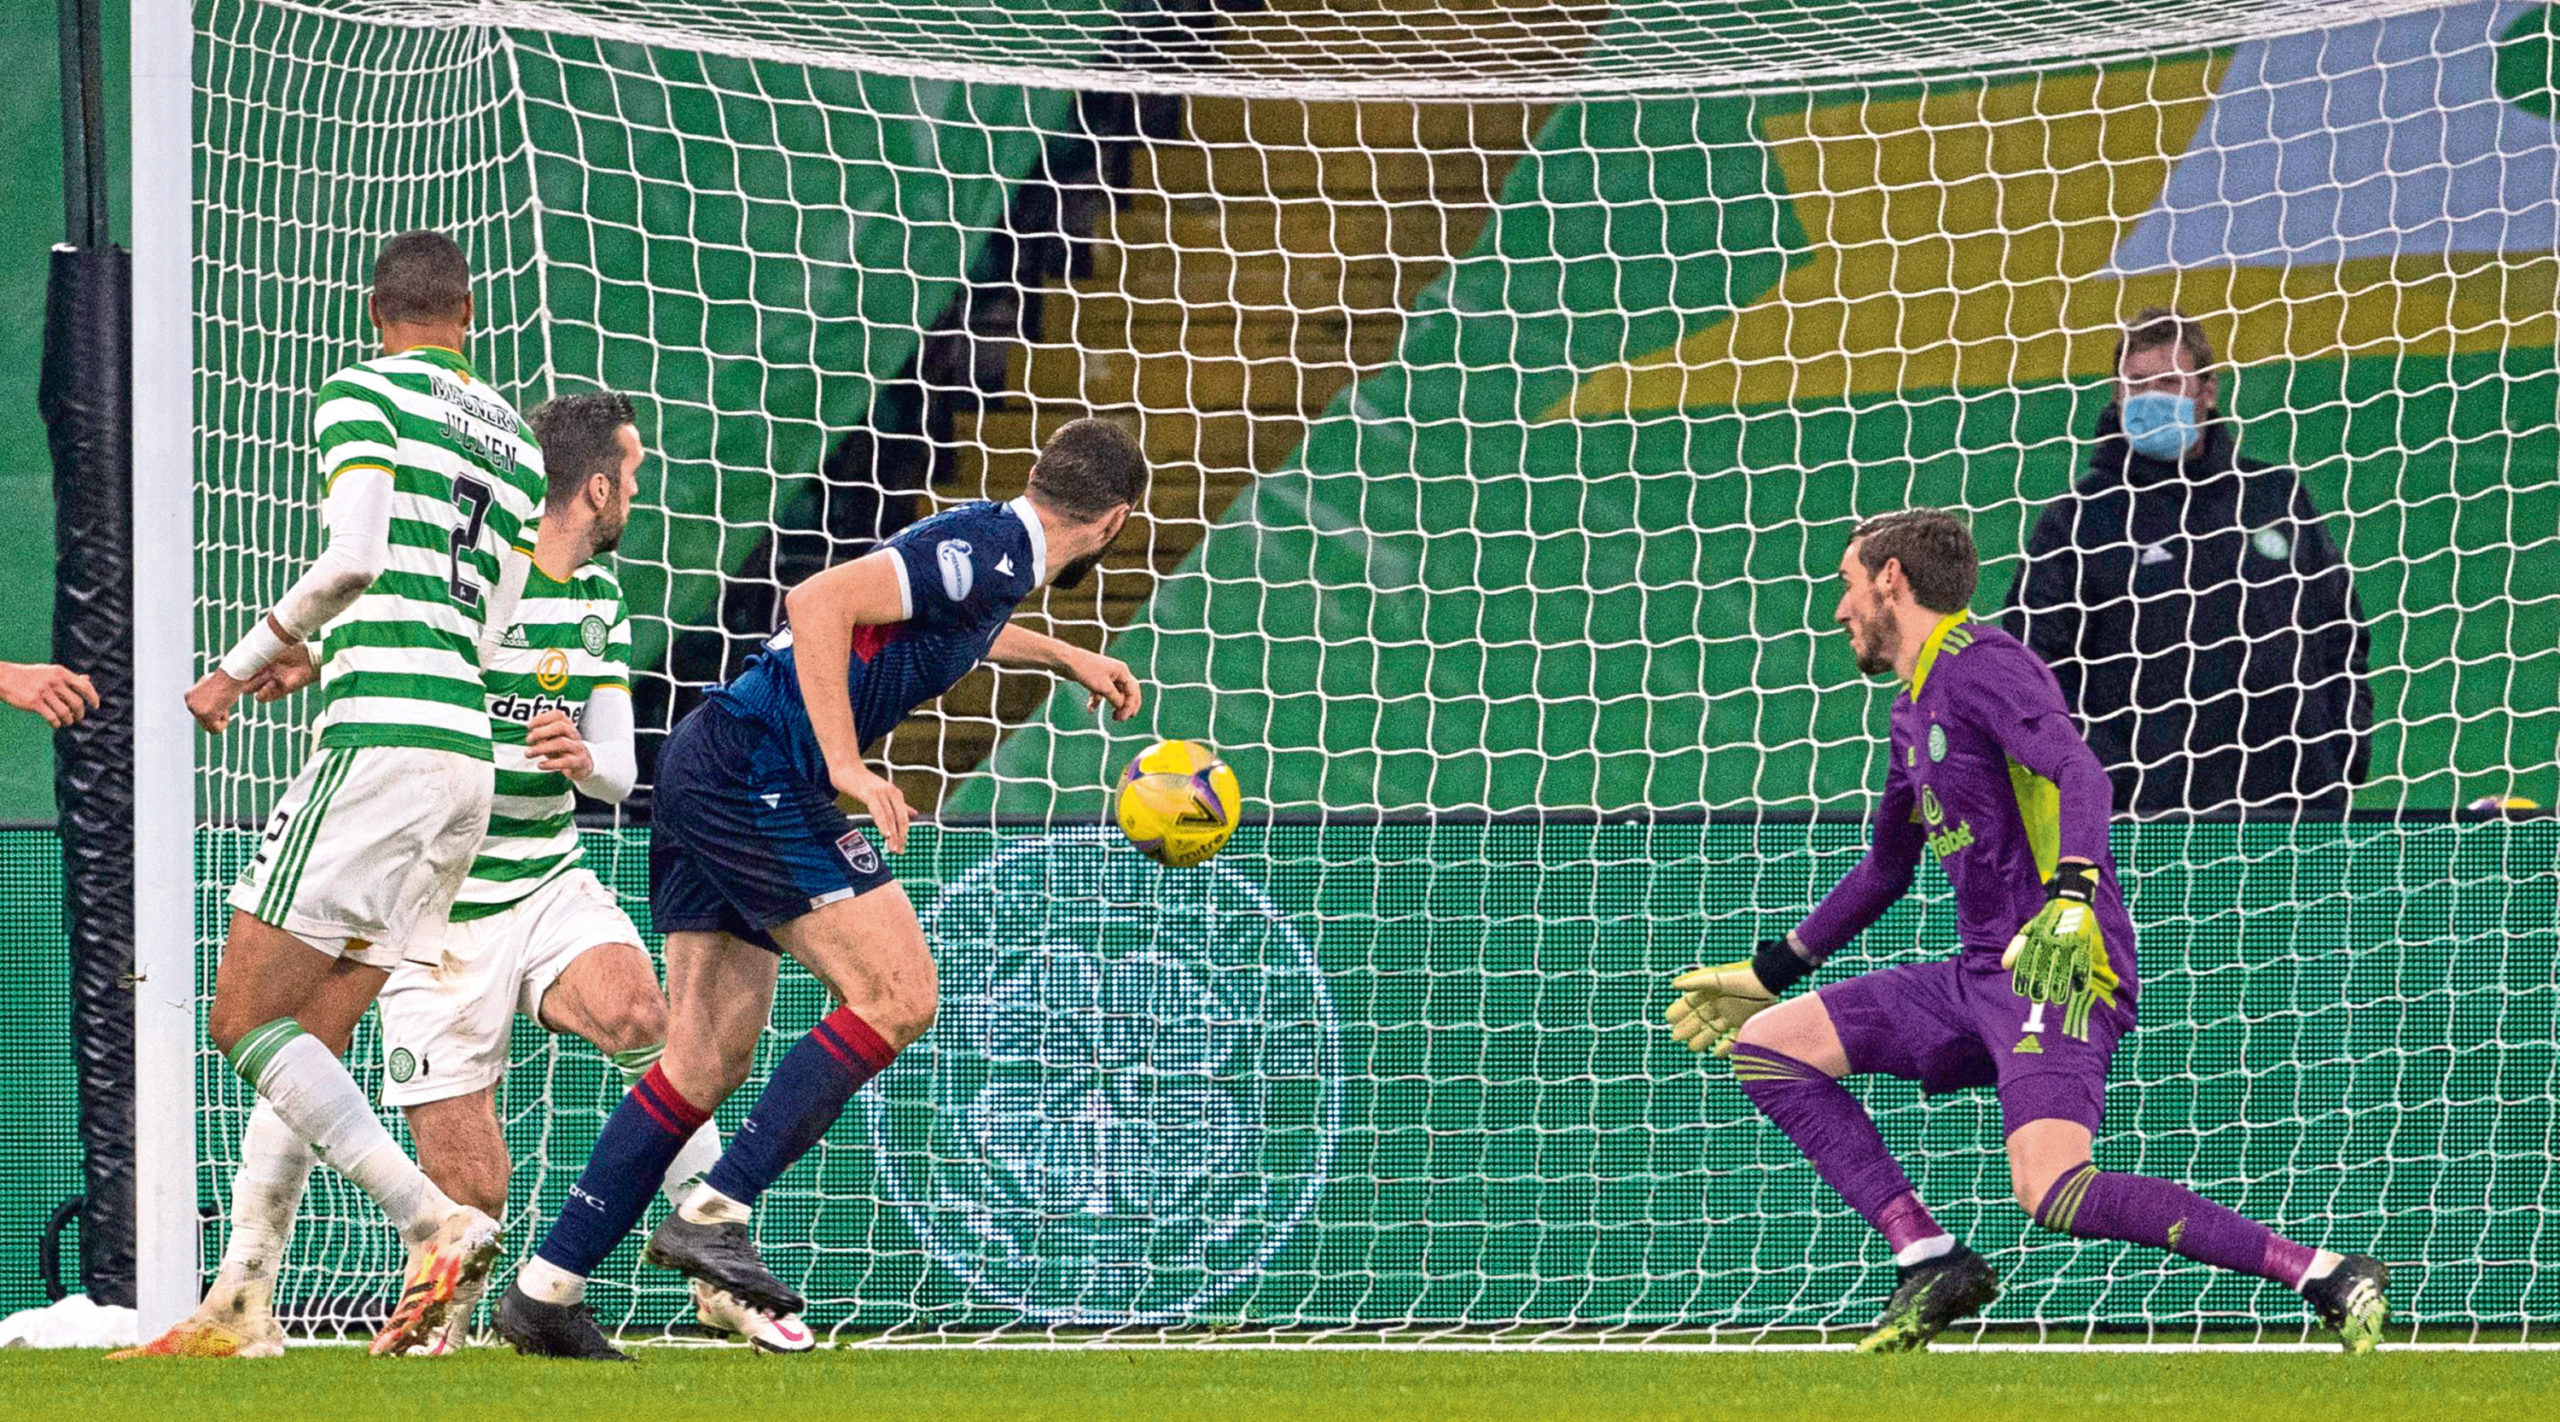 Alex Iacovitti puts Ross County 2-0 up against Celtic.